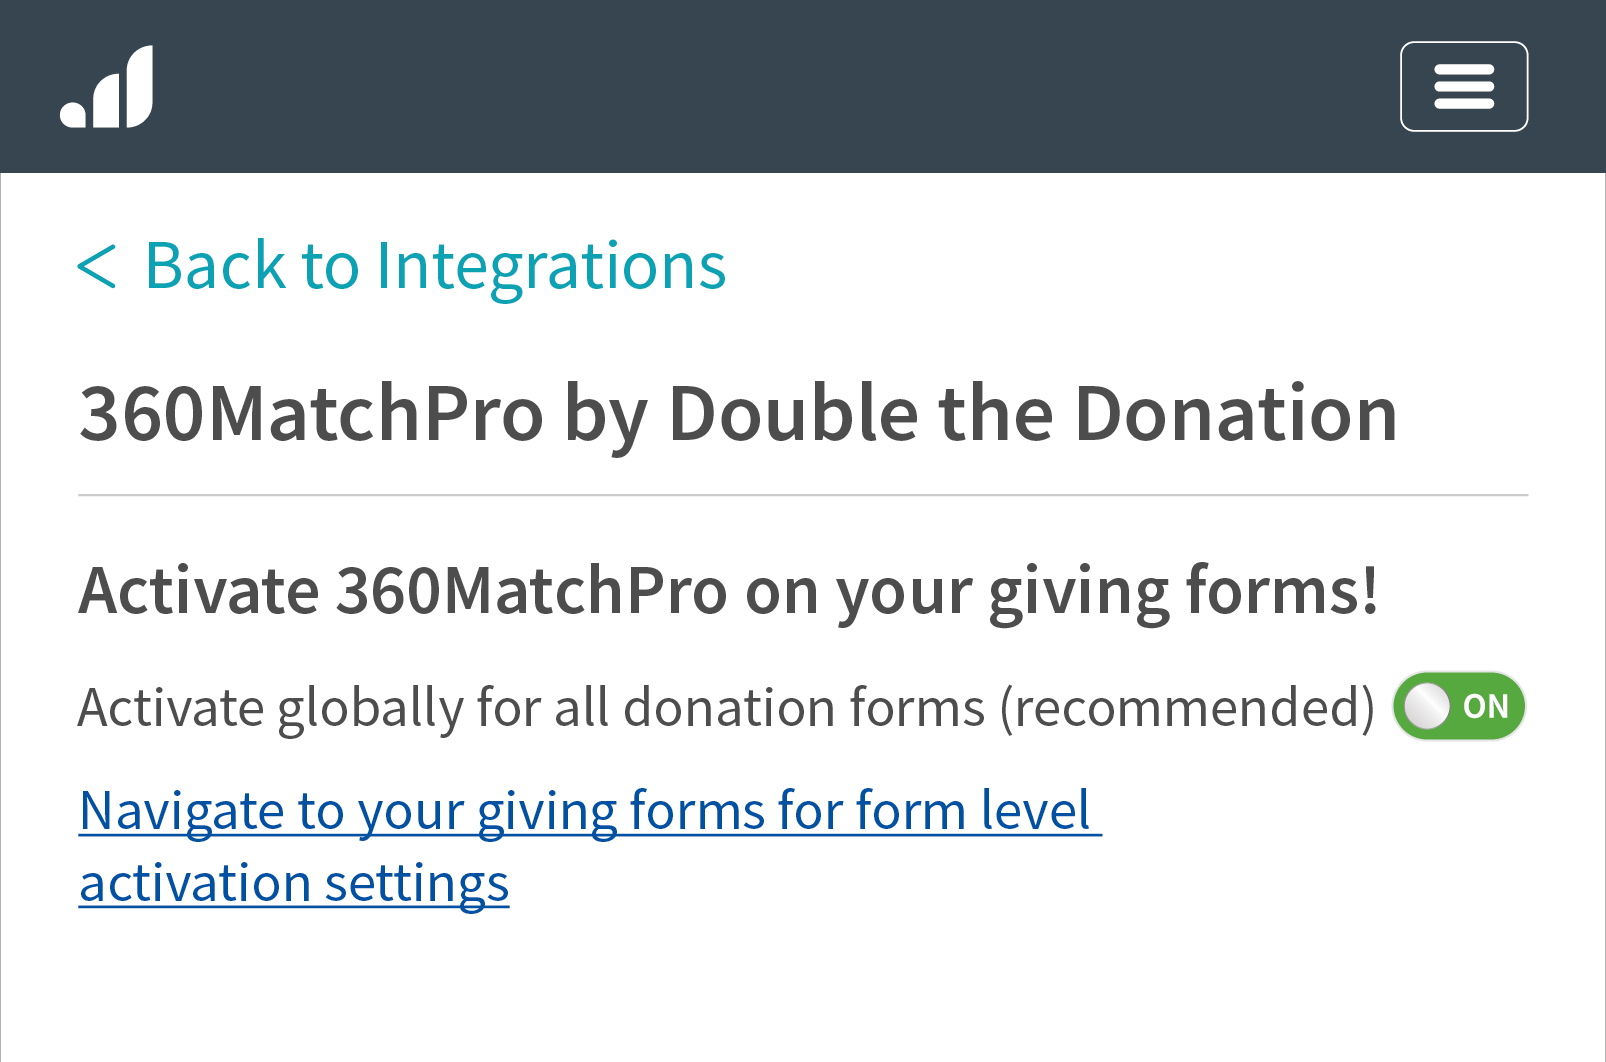 Here's an example of how our favorite online fundraising sites leverage matching gifts.